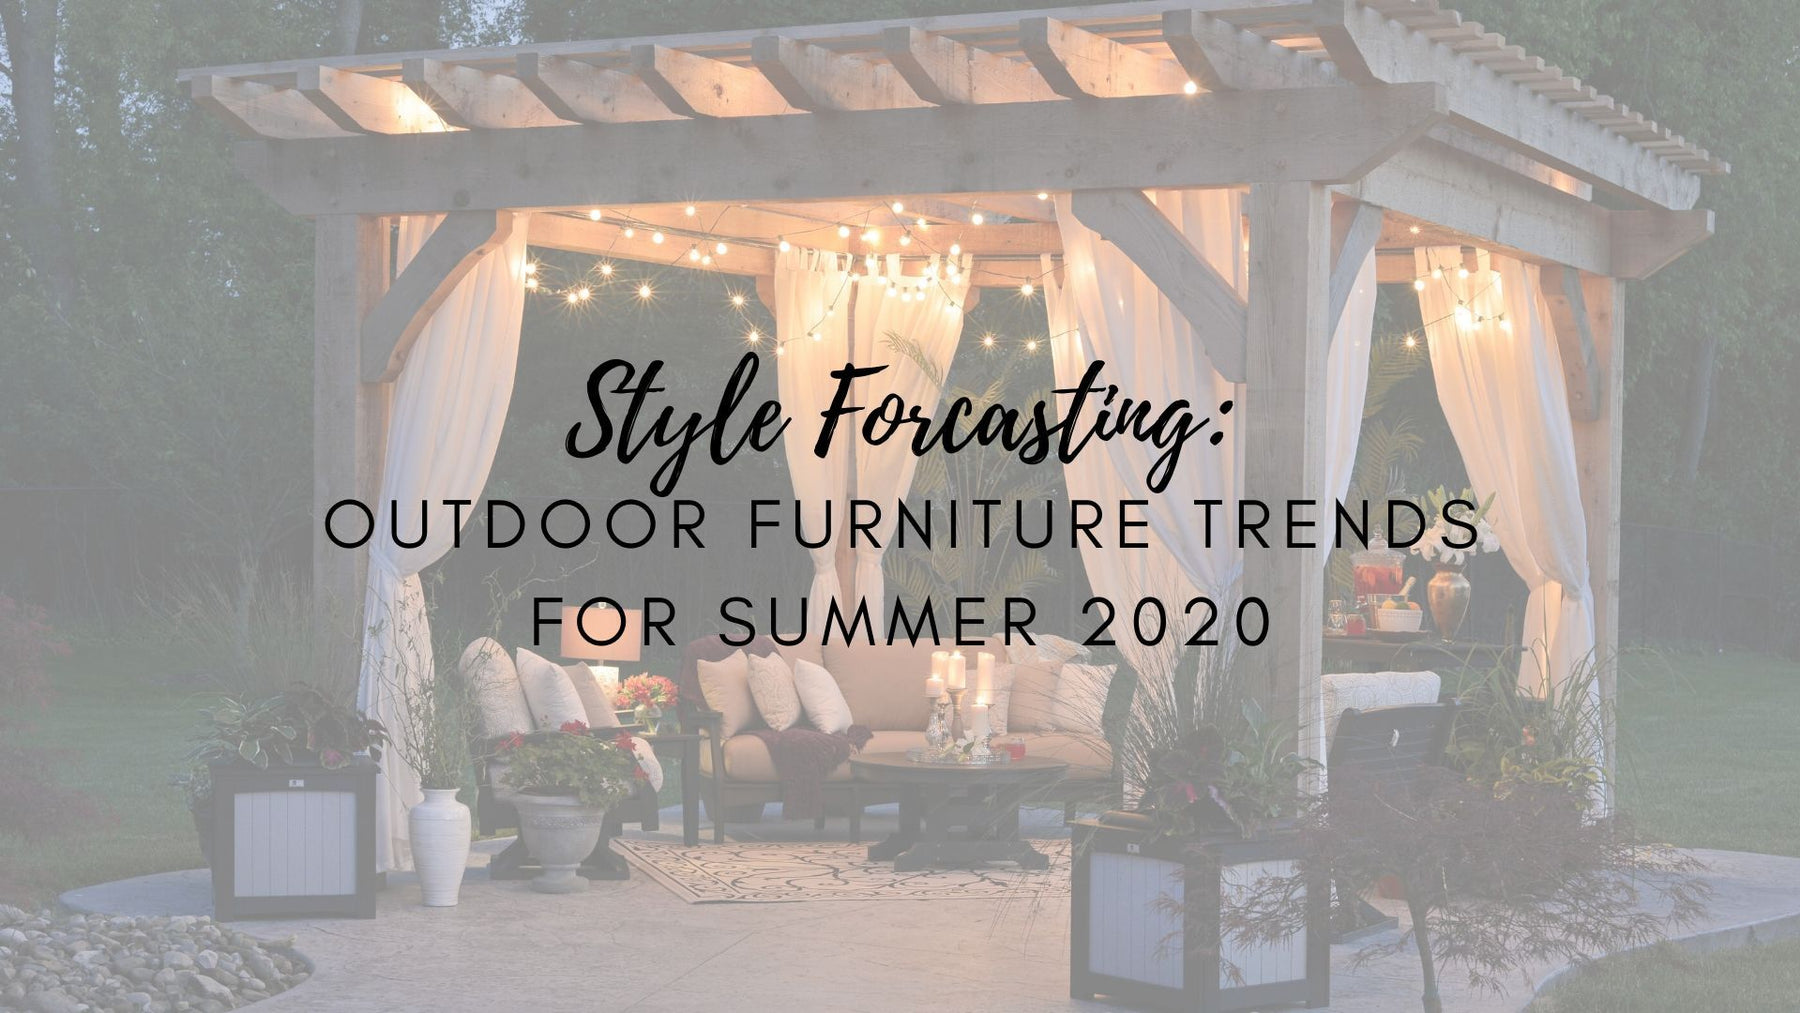 Porch - Style Forecasting: Outdoor Furniture Trends for Summer 2020